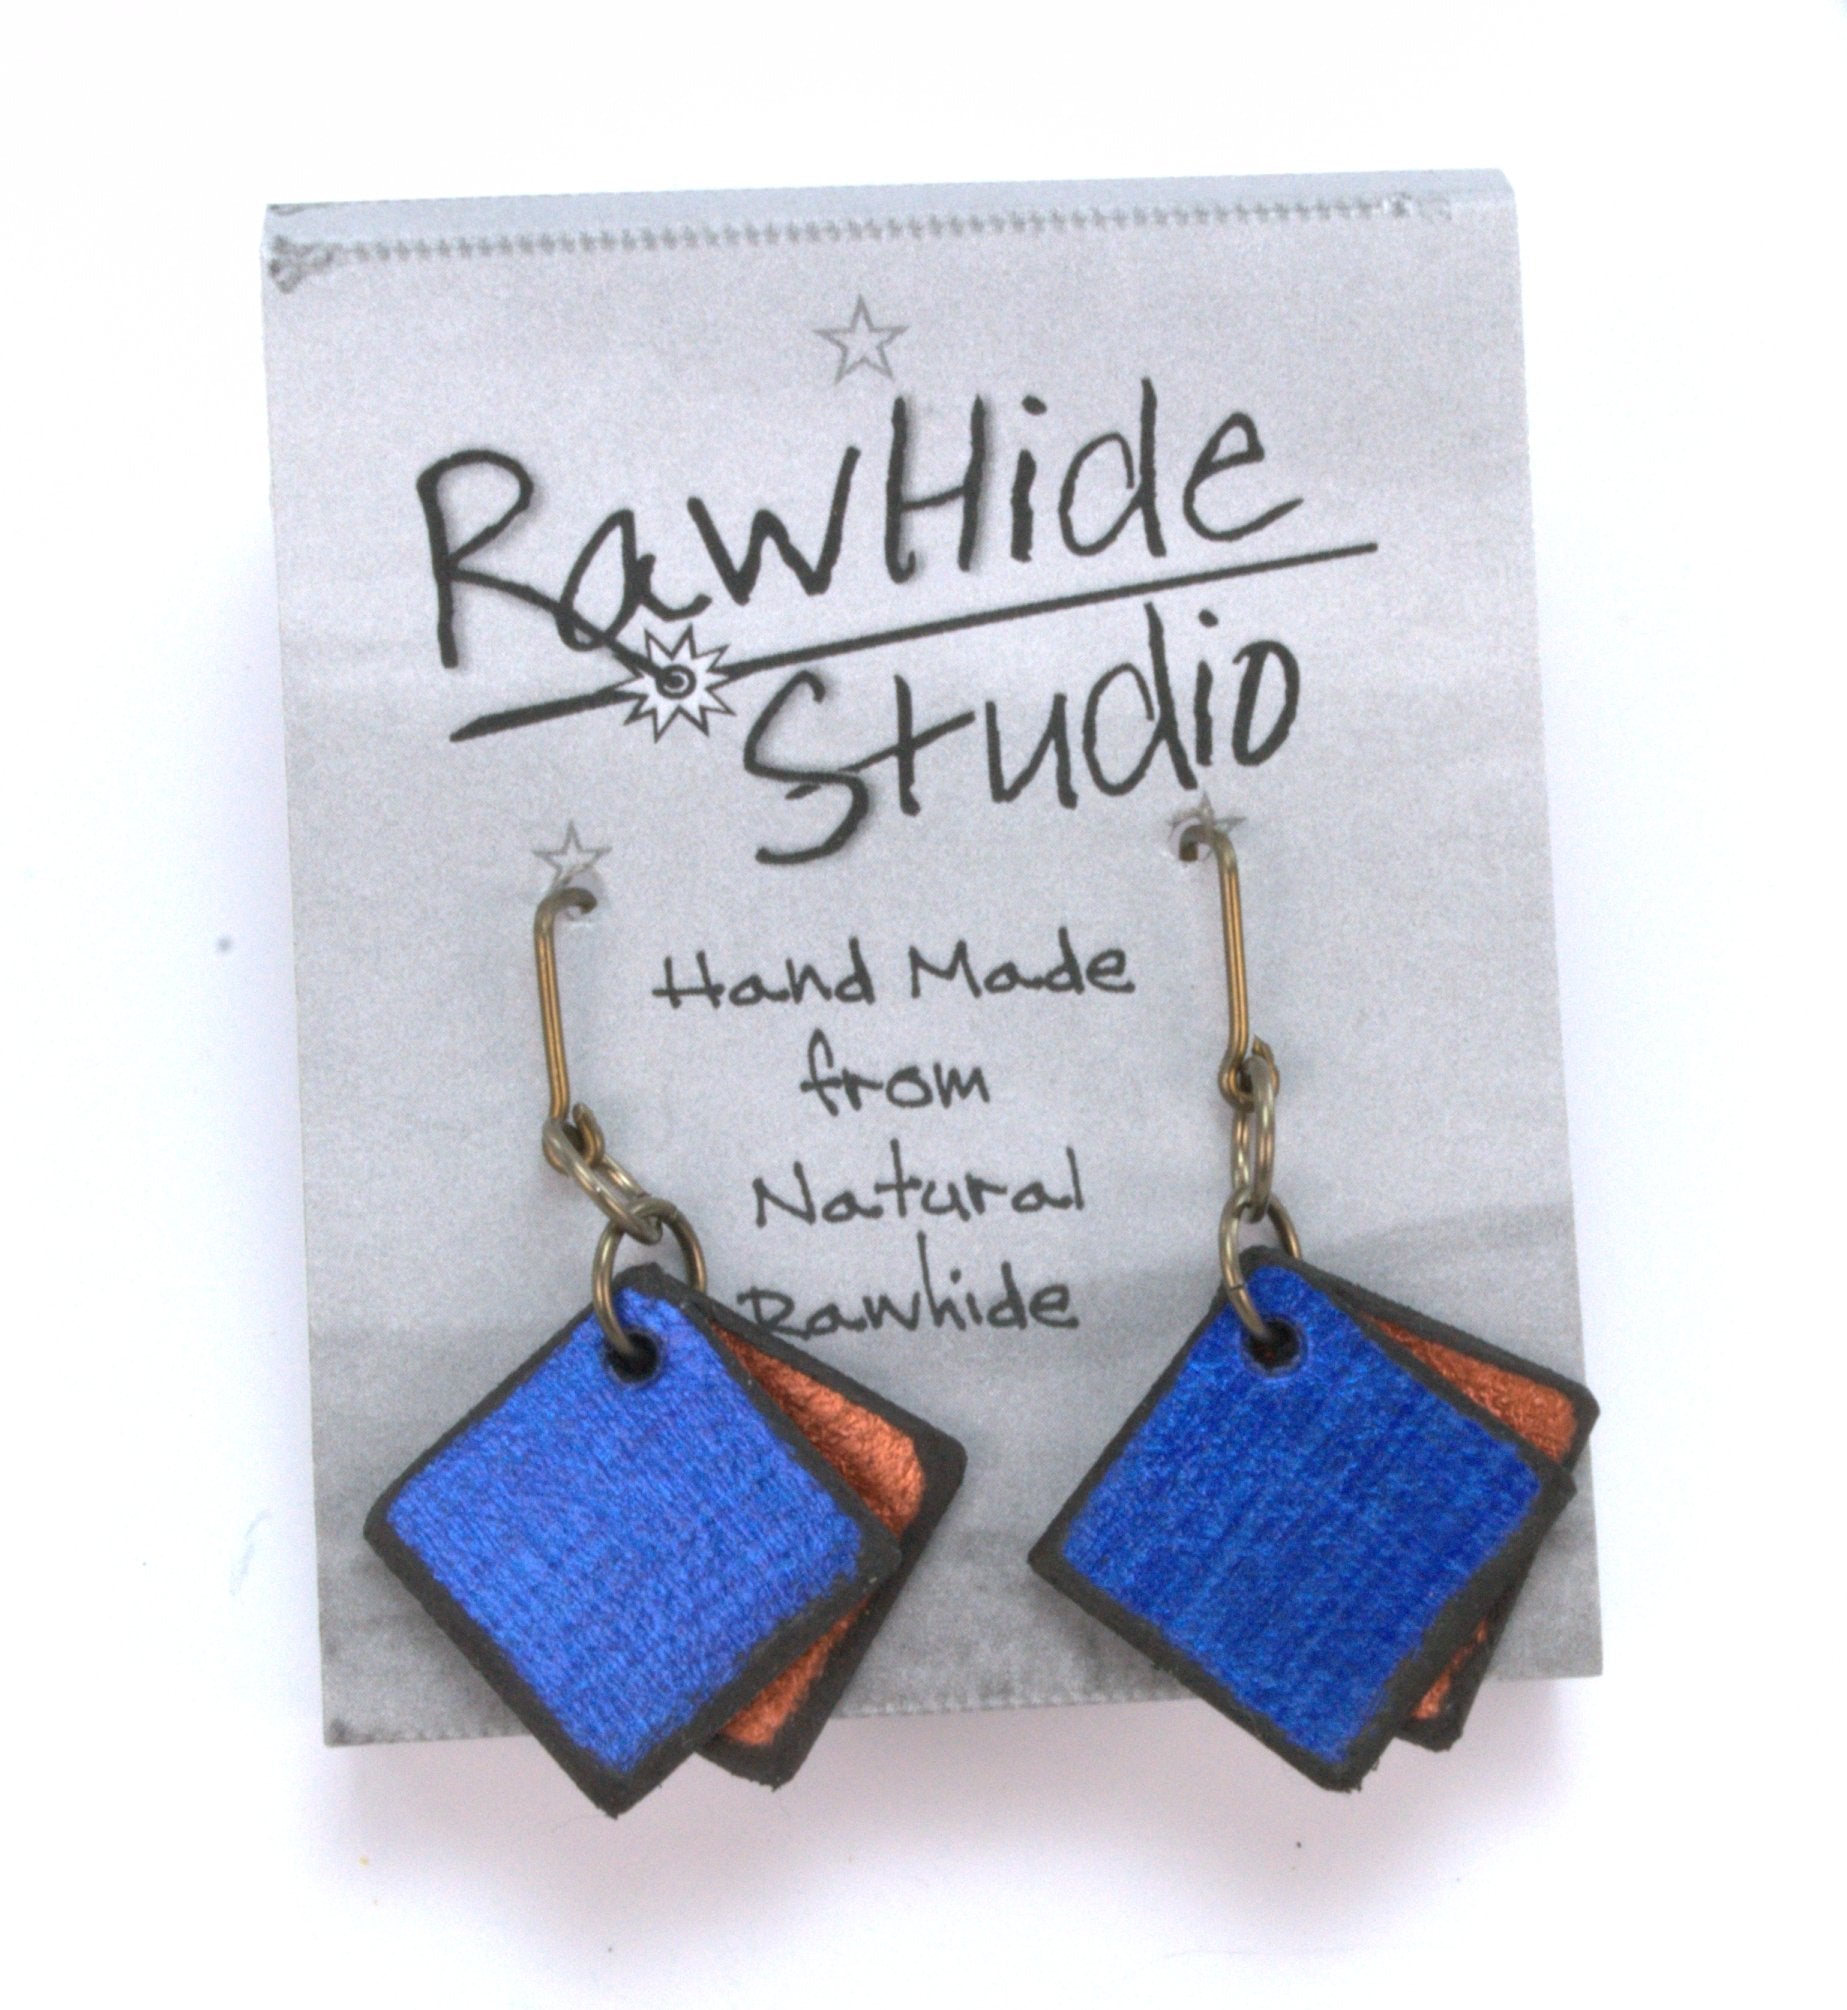 Rawhide Studio earrings come on an attractive display card and included two plastic ear nuts 